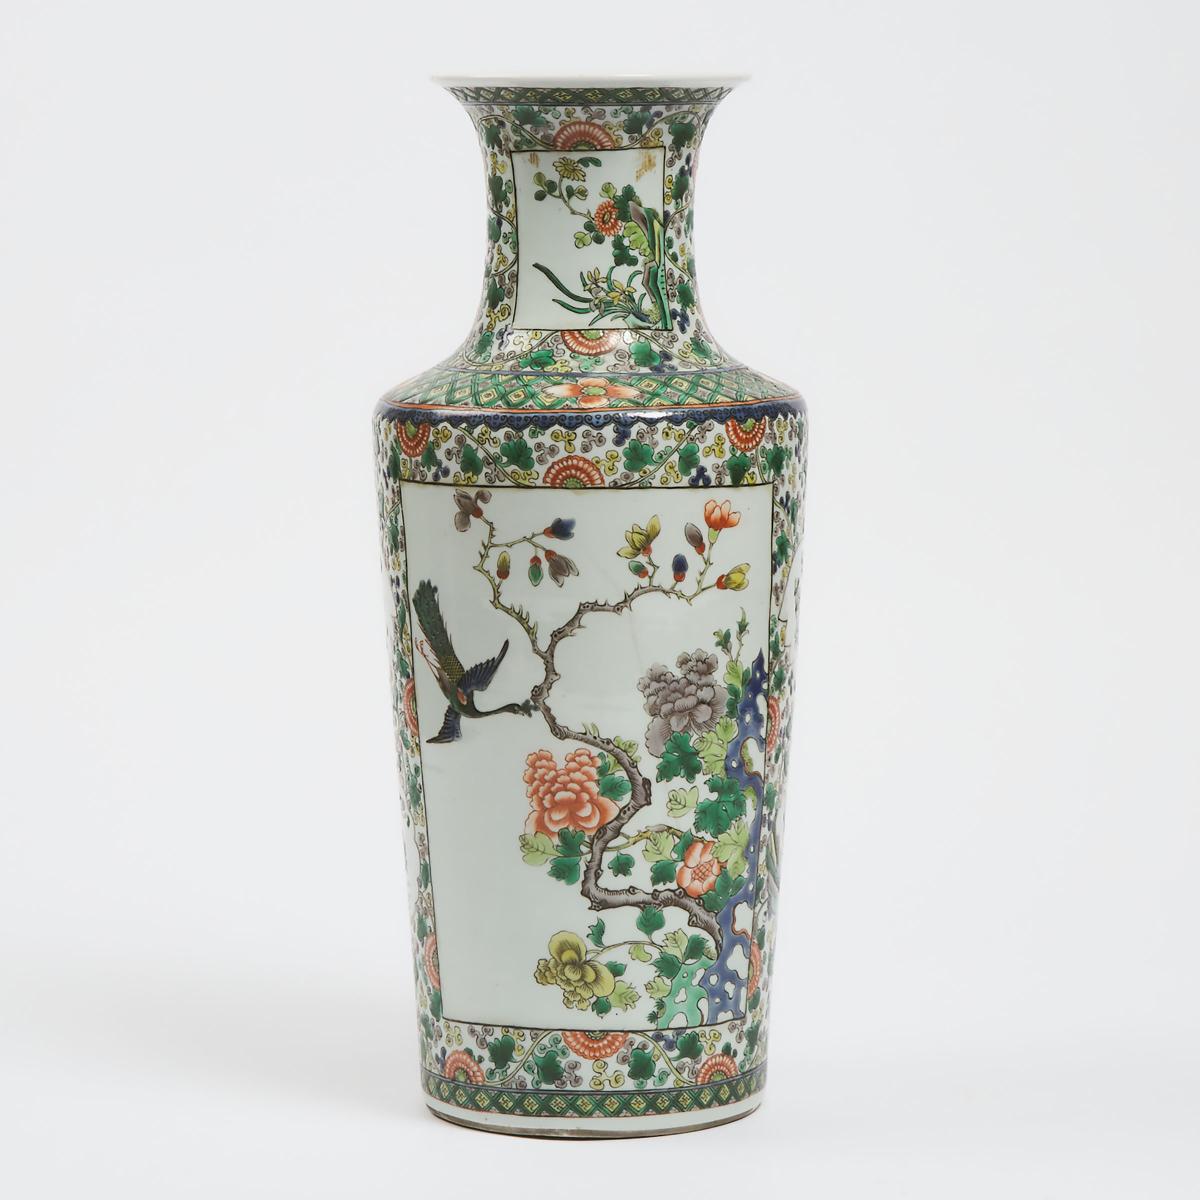 A Chinese Wucai 'Birds and Flowers' Rouleau Vase, 19th Century, 十九世纪 五彩花鸟纹棒槌瓶, height 17 in — 43.2 c - Image 2 of 4